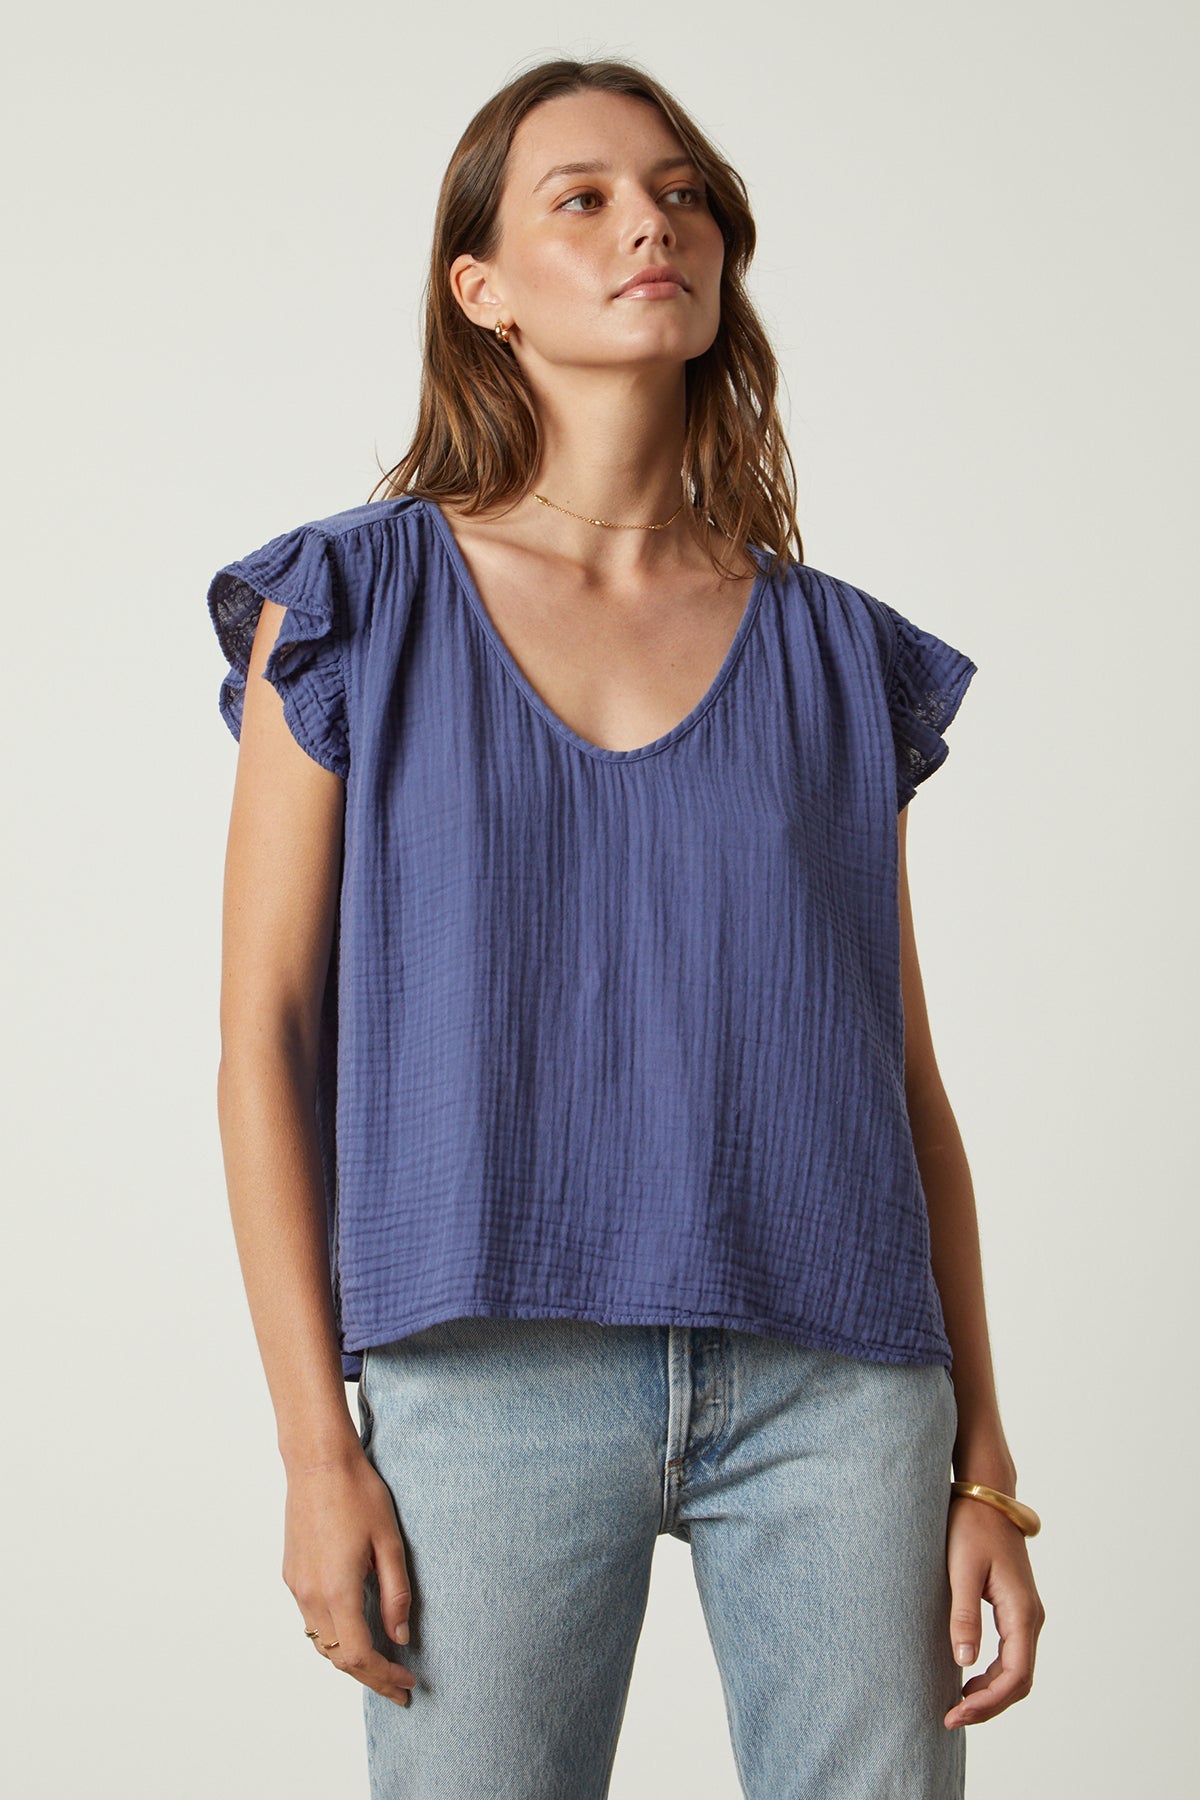   the REMI RUFFLE SLEEVE TOP in blue by Velvet by Graham & Spencer. 